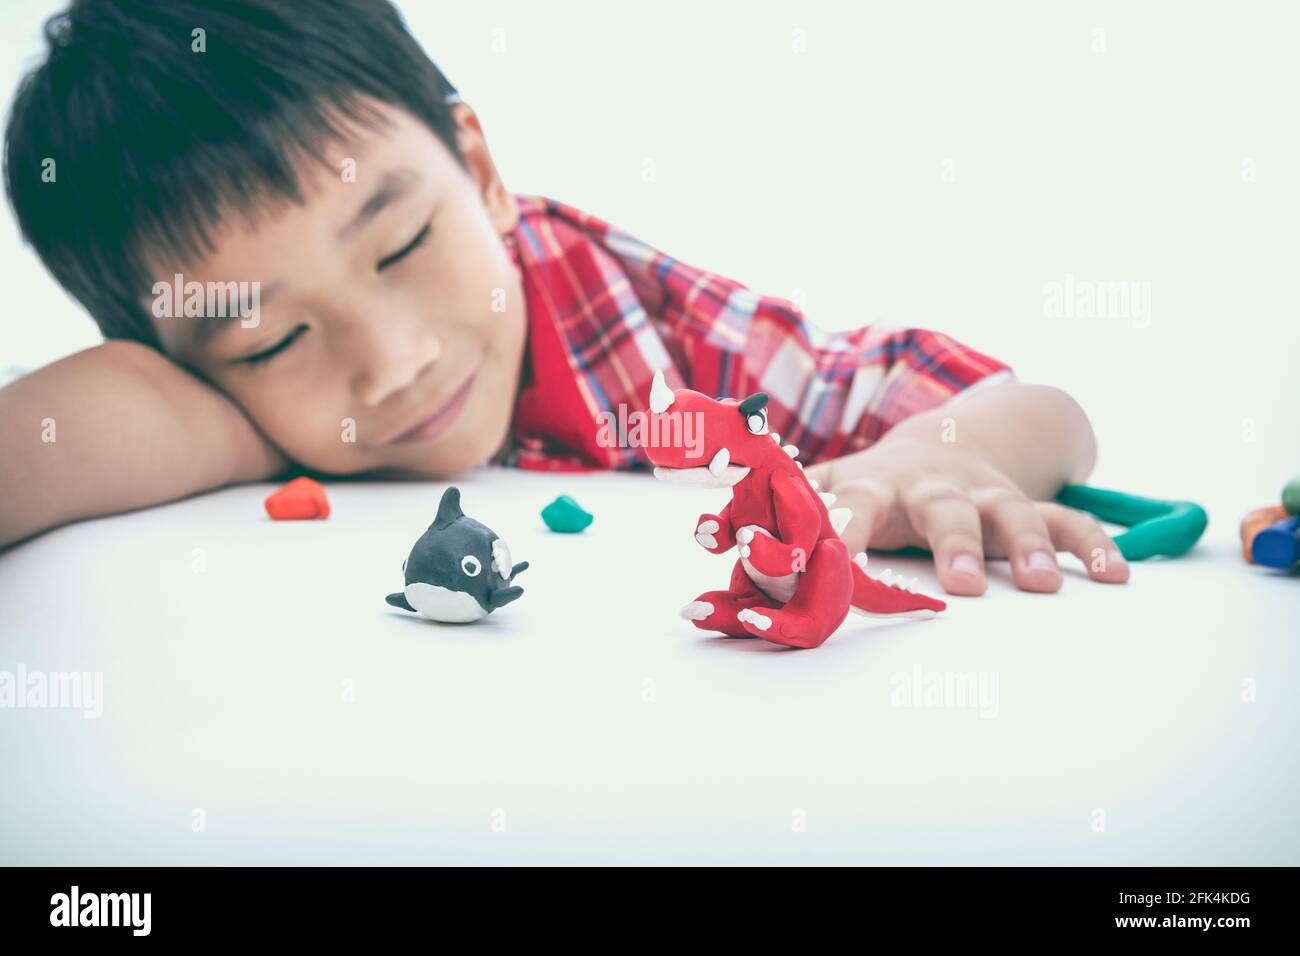 Asian handsome child sleeping with his works from clay, on white background. Strengthen the imagination of child. Vintage picture style. Selective Foc Stock Photo